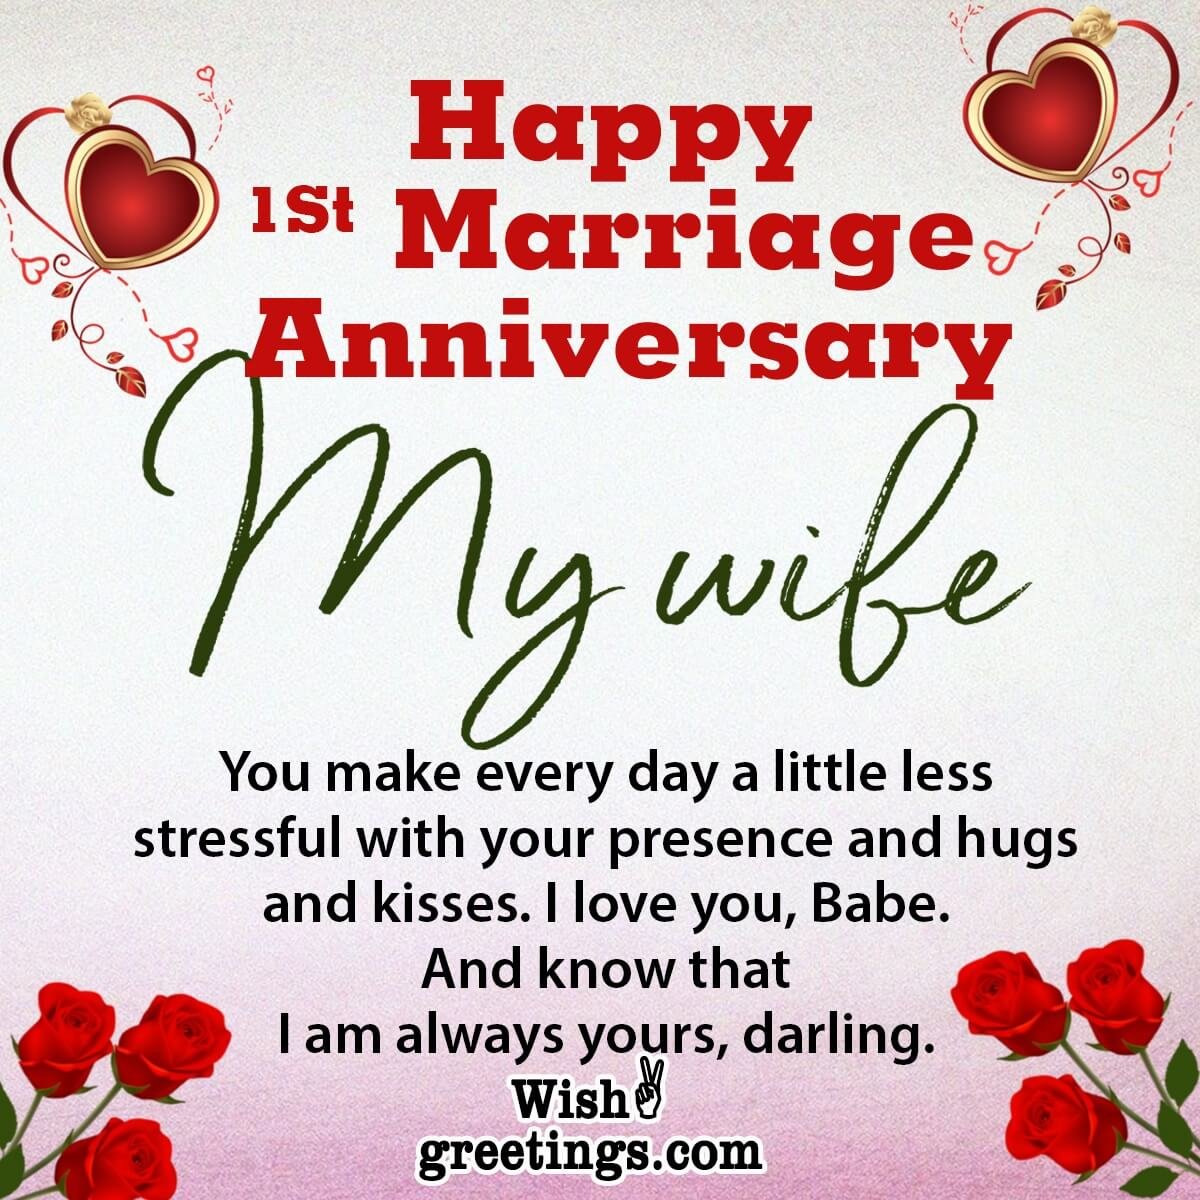 First Wedding Anniversary Wishes For Wife Wish Greetings